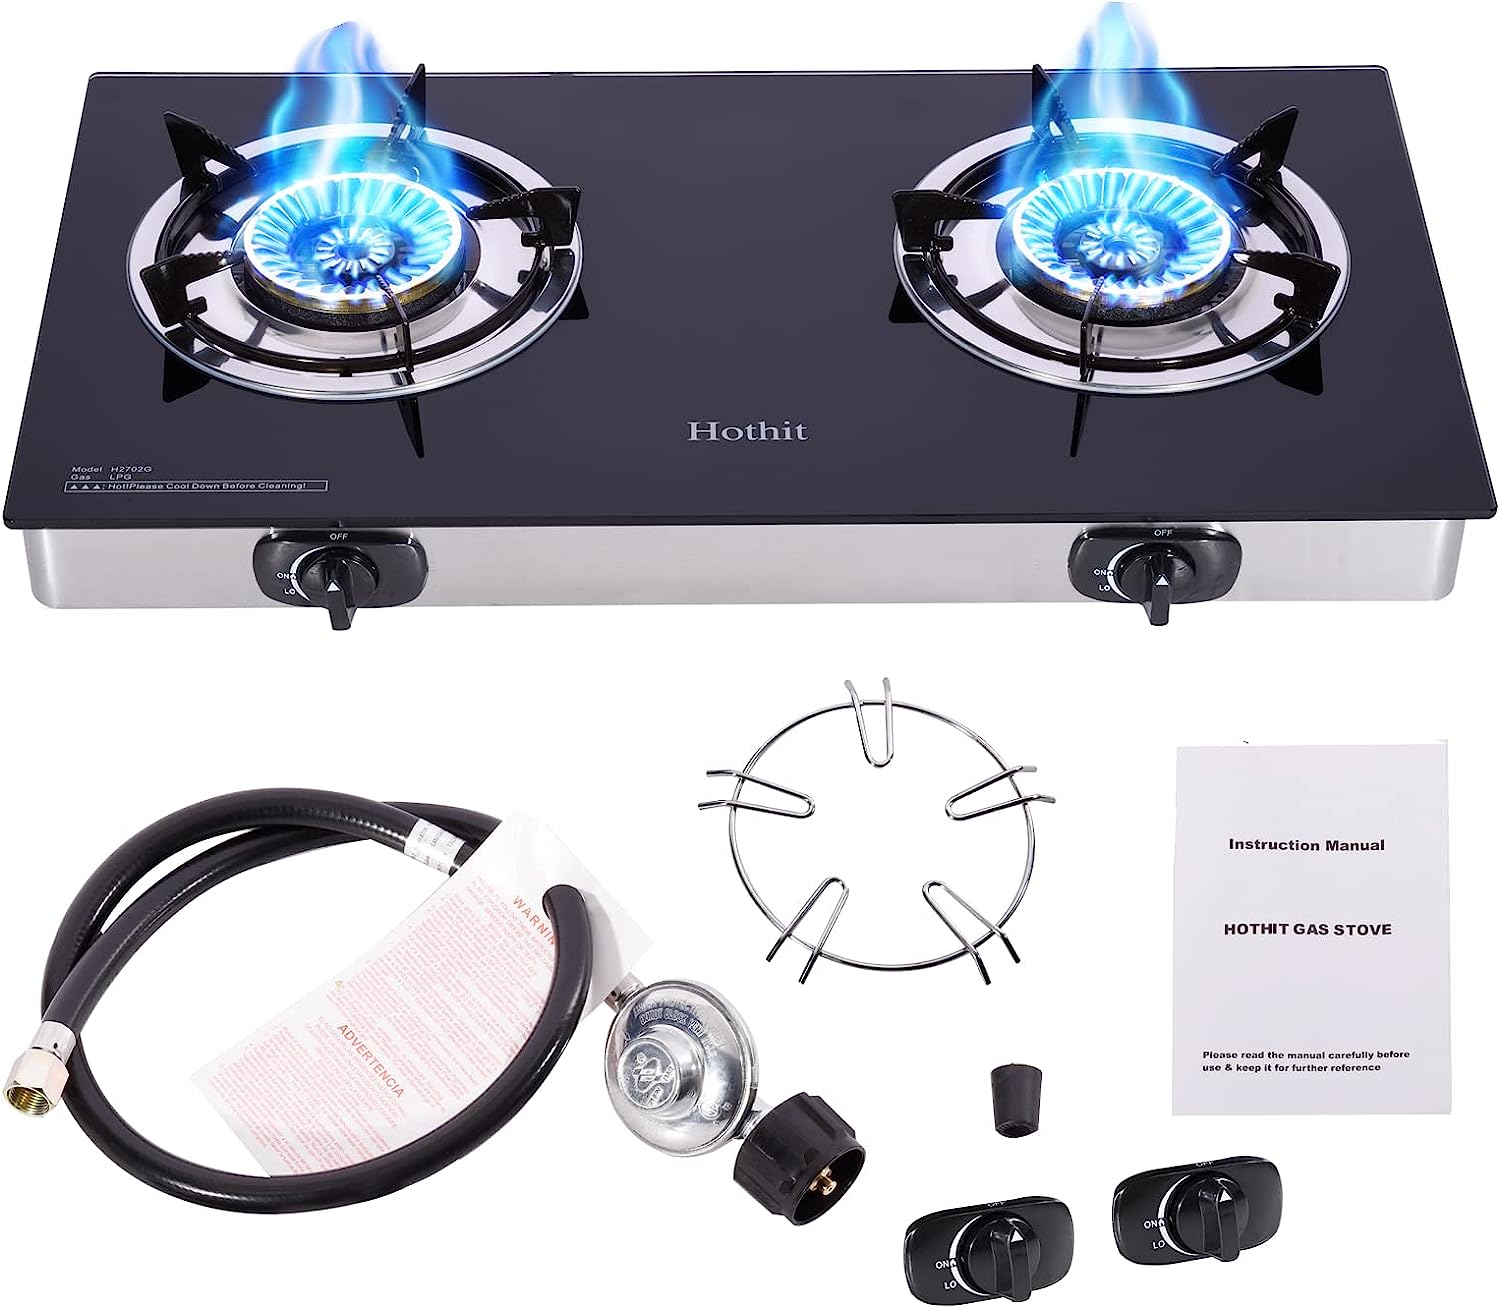 Hothit Portable 2 Burner Propane Stove Gas Cooktop, [...]